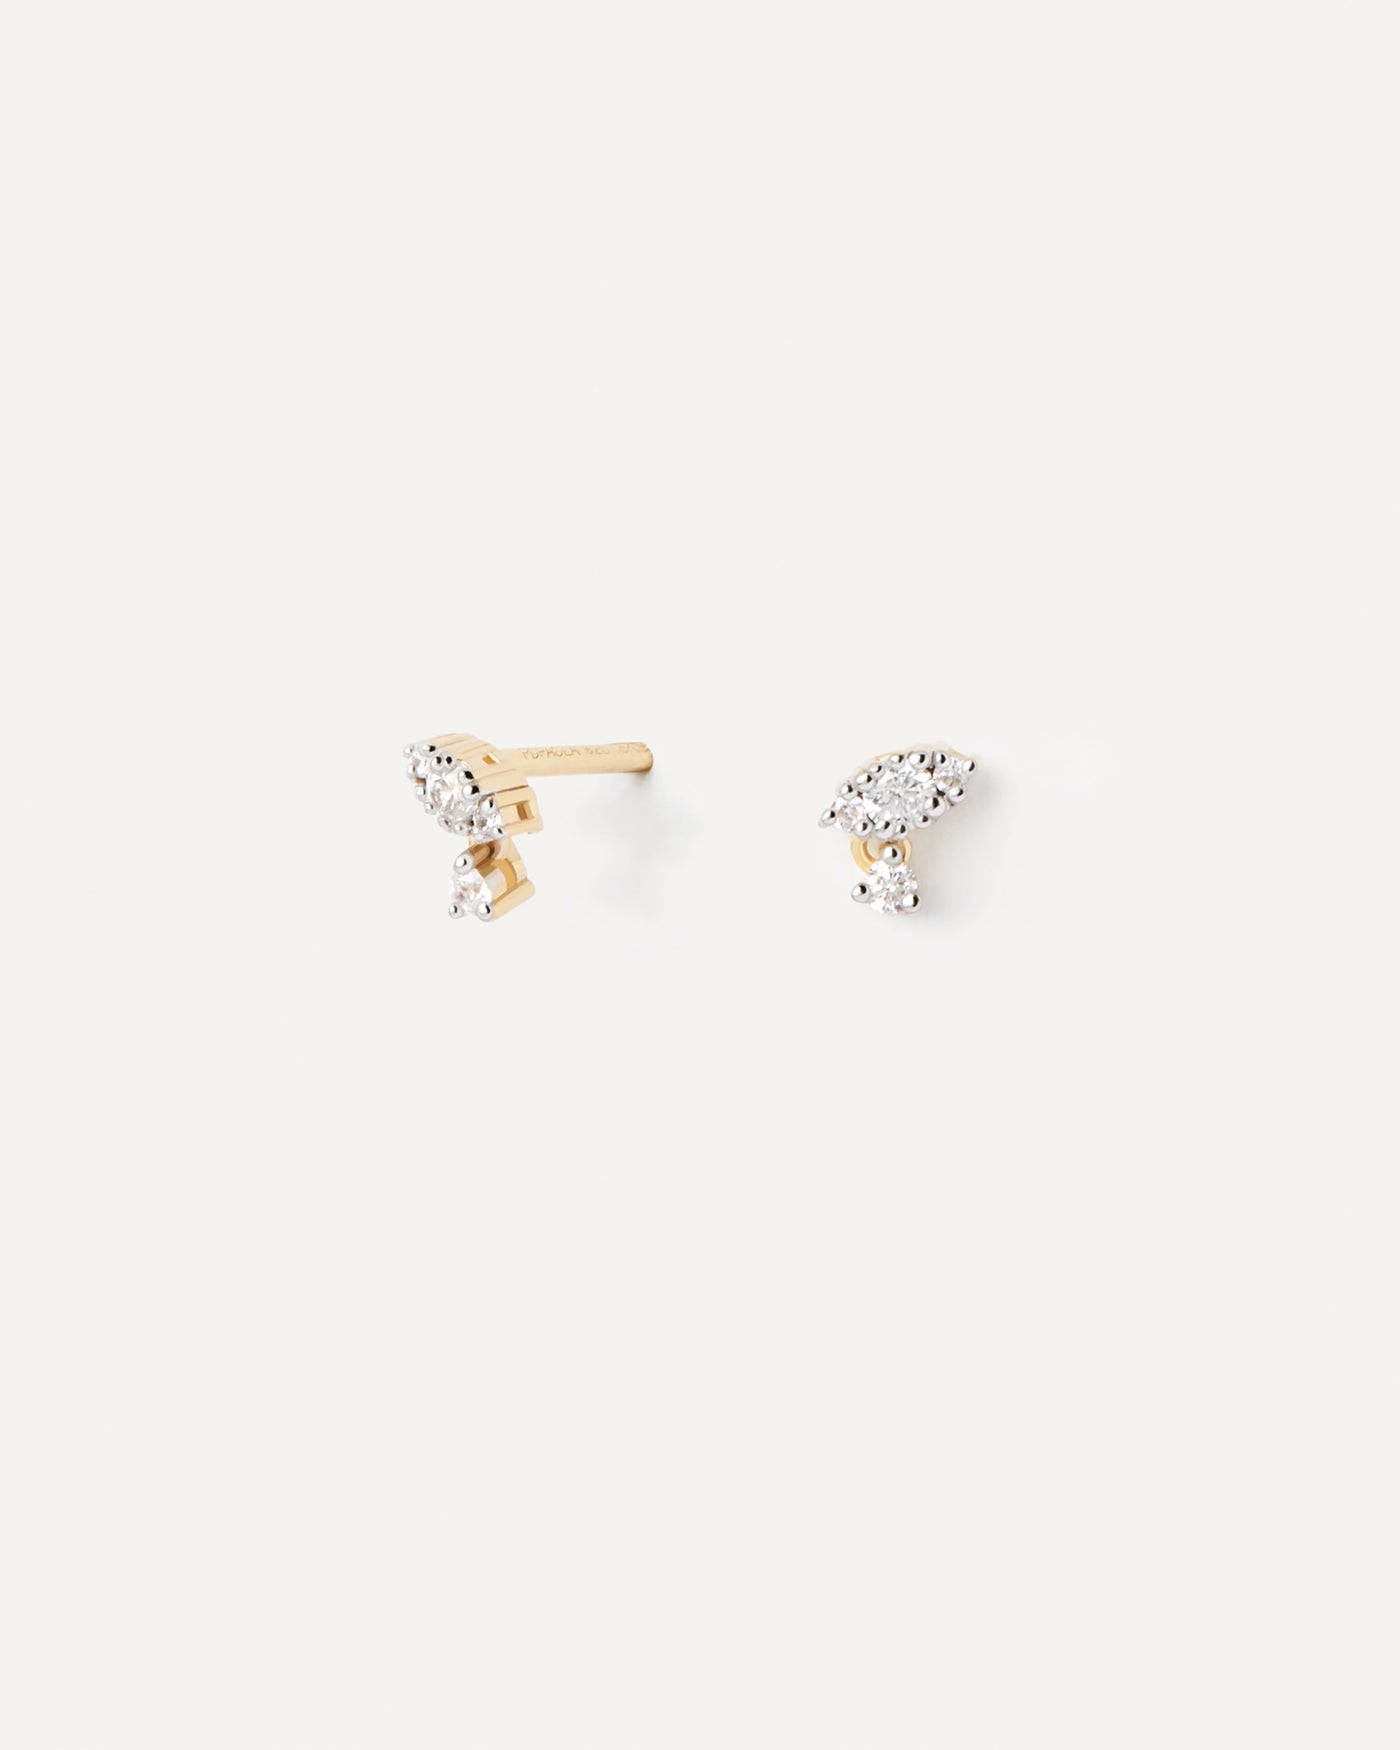 2023 Selection | Diamonds And Gold Lucy Stud Earrings. Leaf shaped studs in solid yellow gold set with 8 diamonds, totaling 0.11 carats. Get the latest arrival from PDPAOLA. Place your order safely and get this Best Seller. Free Shipping.